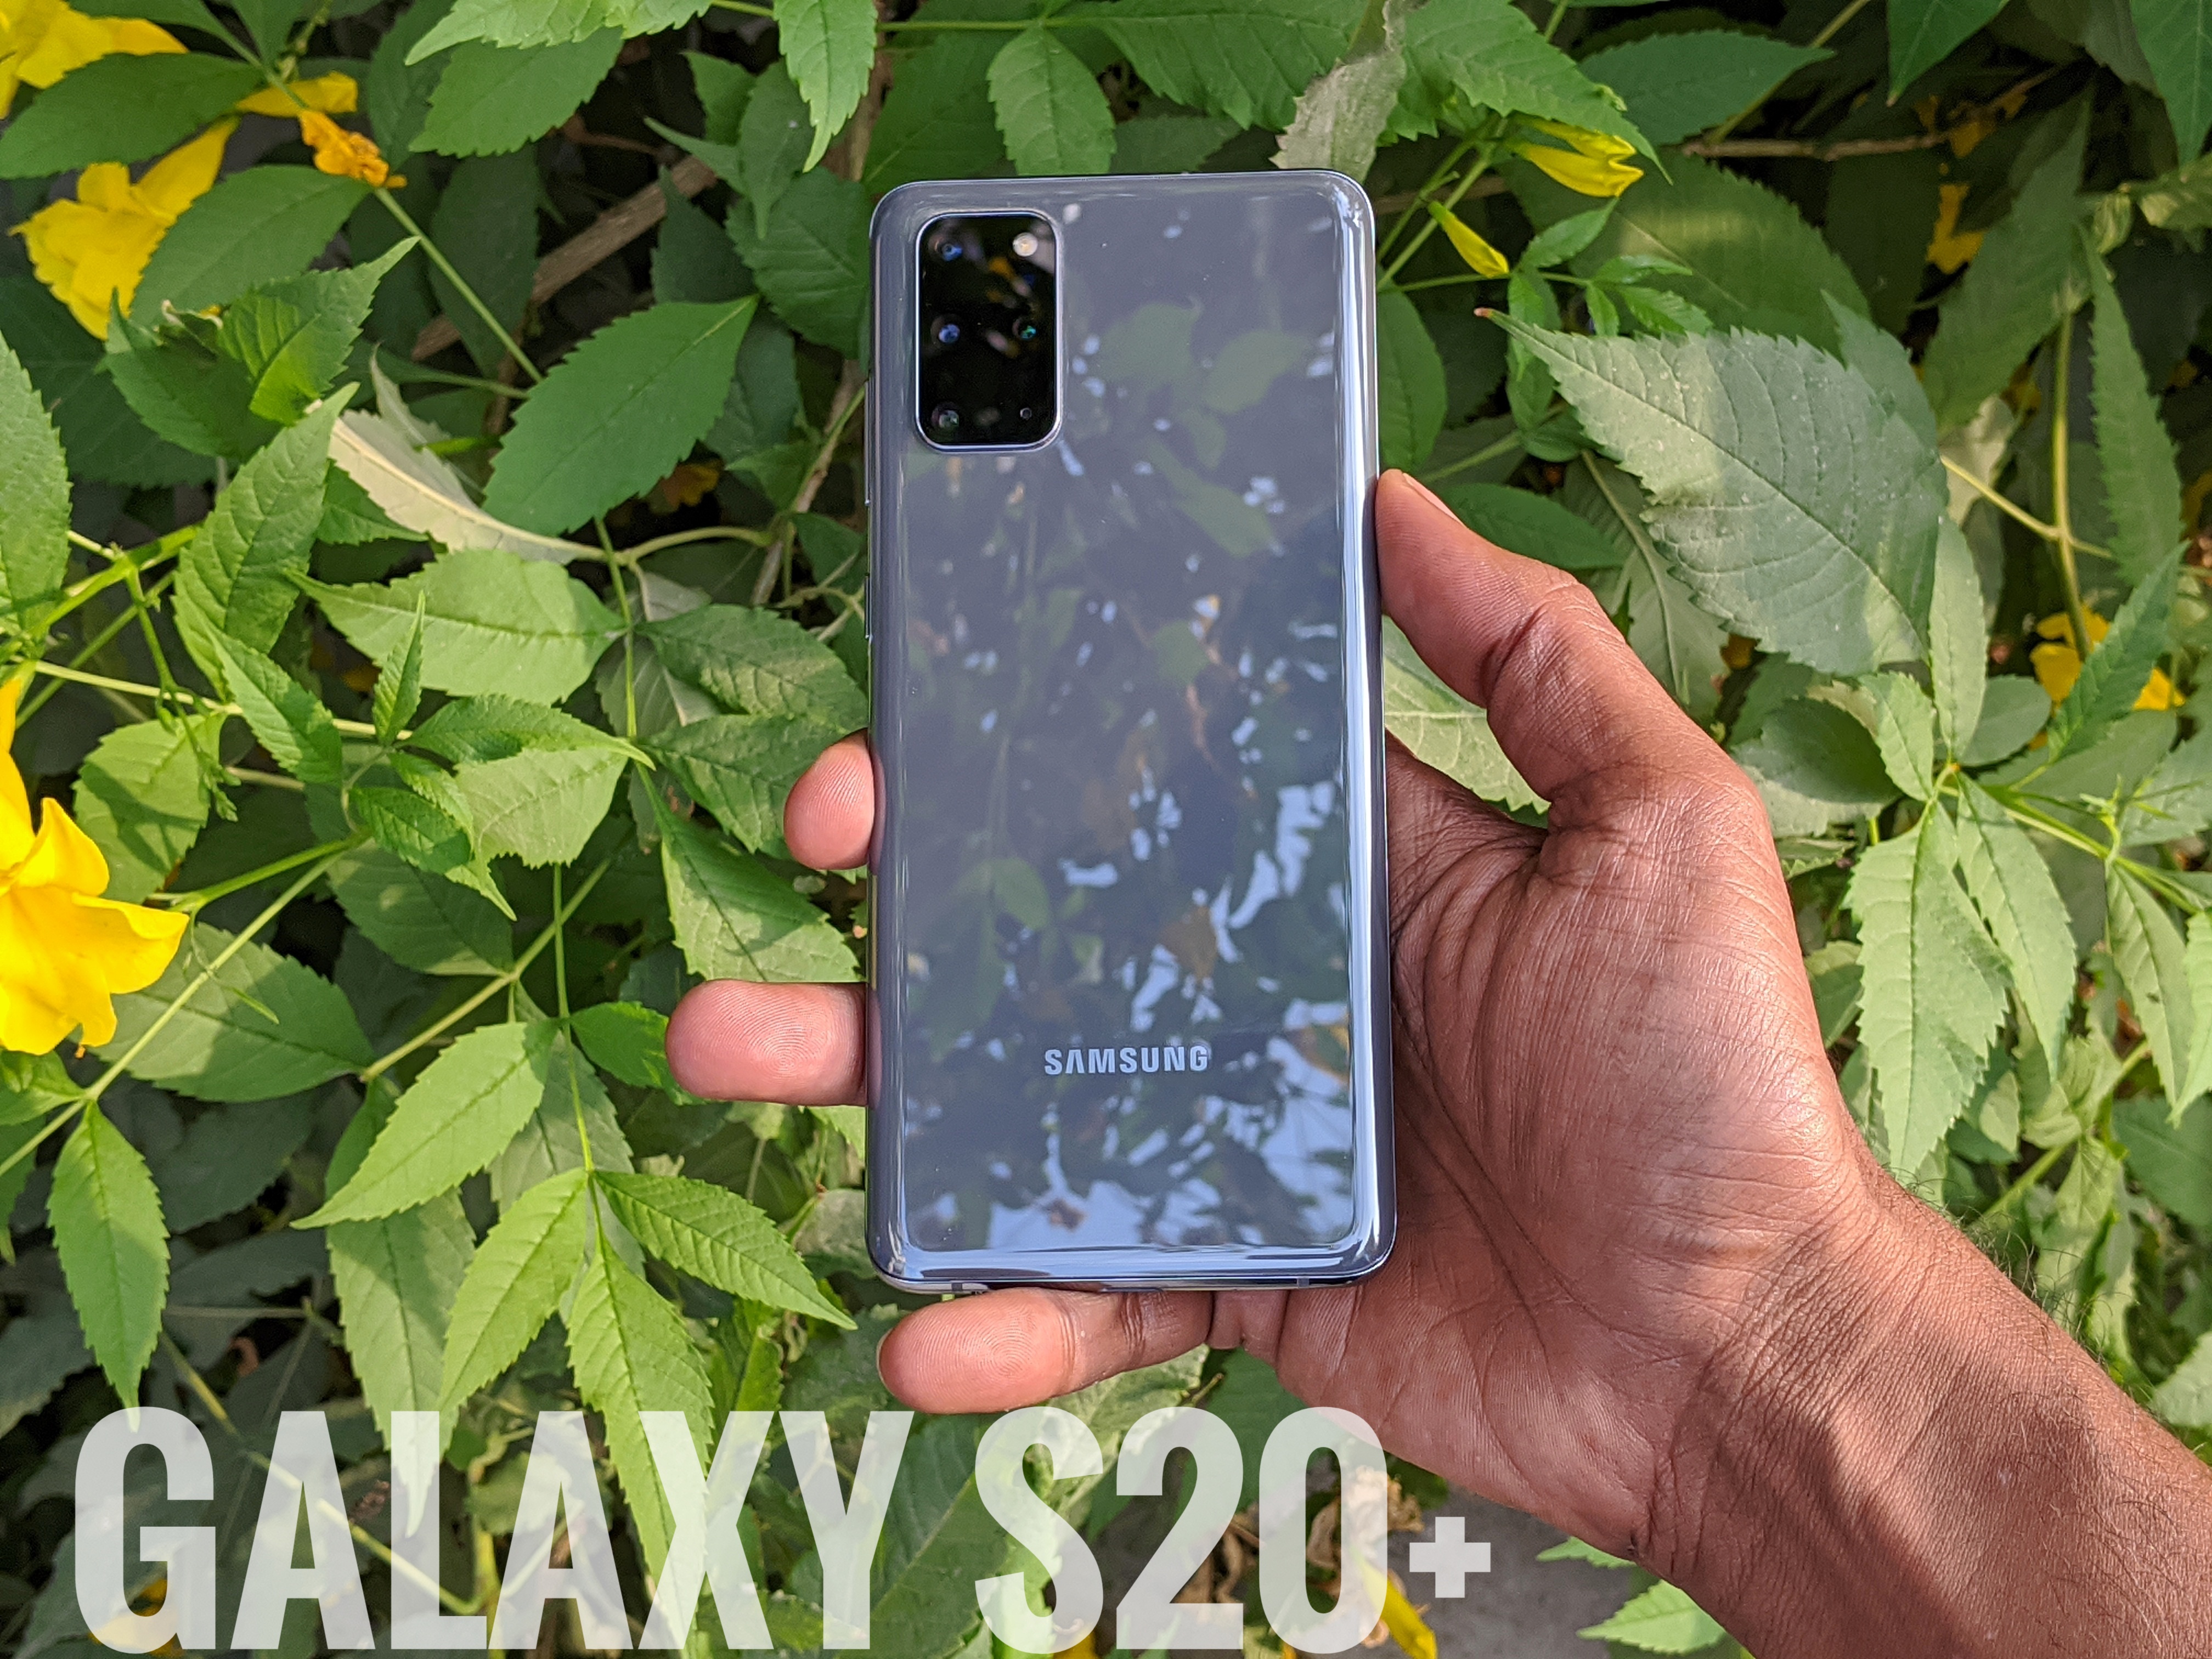 Samsung Galaxy S20+ Review: Consistently Dependable